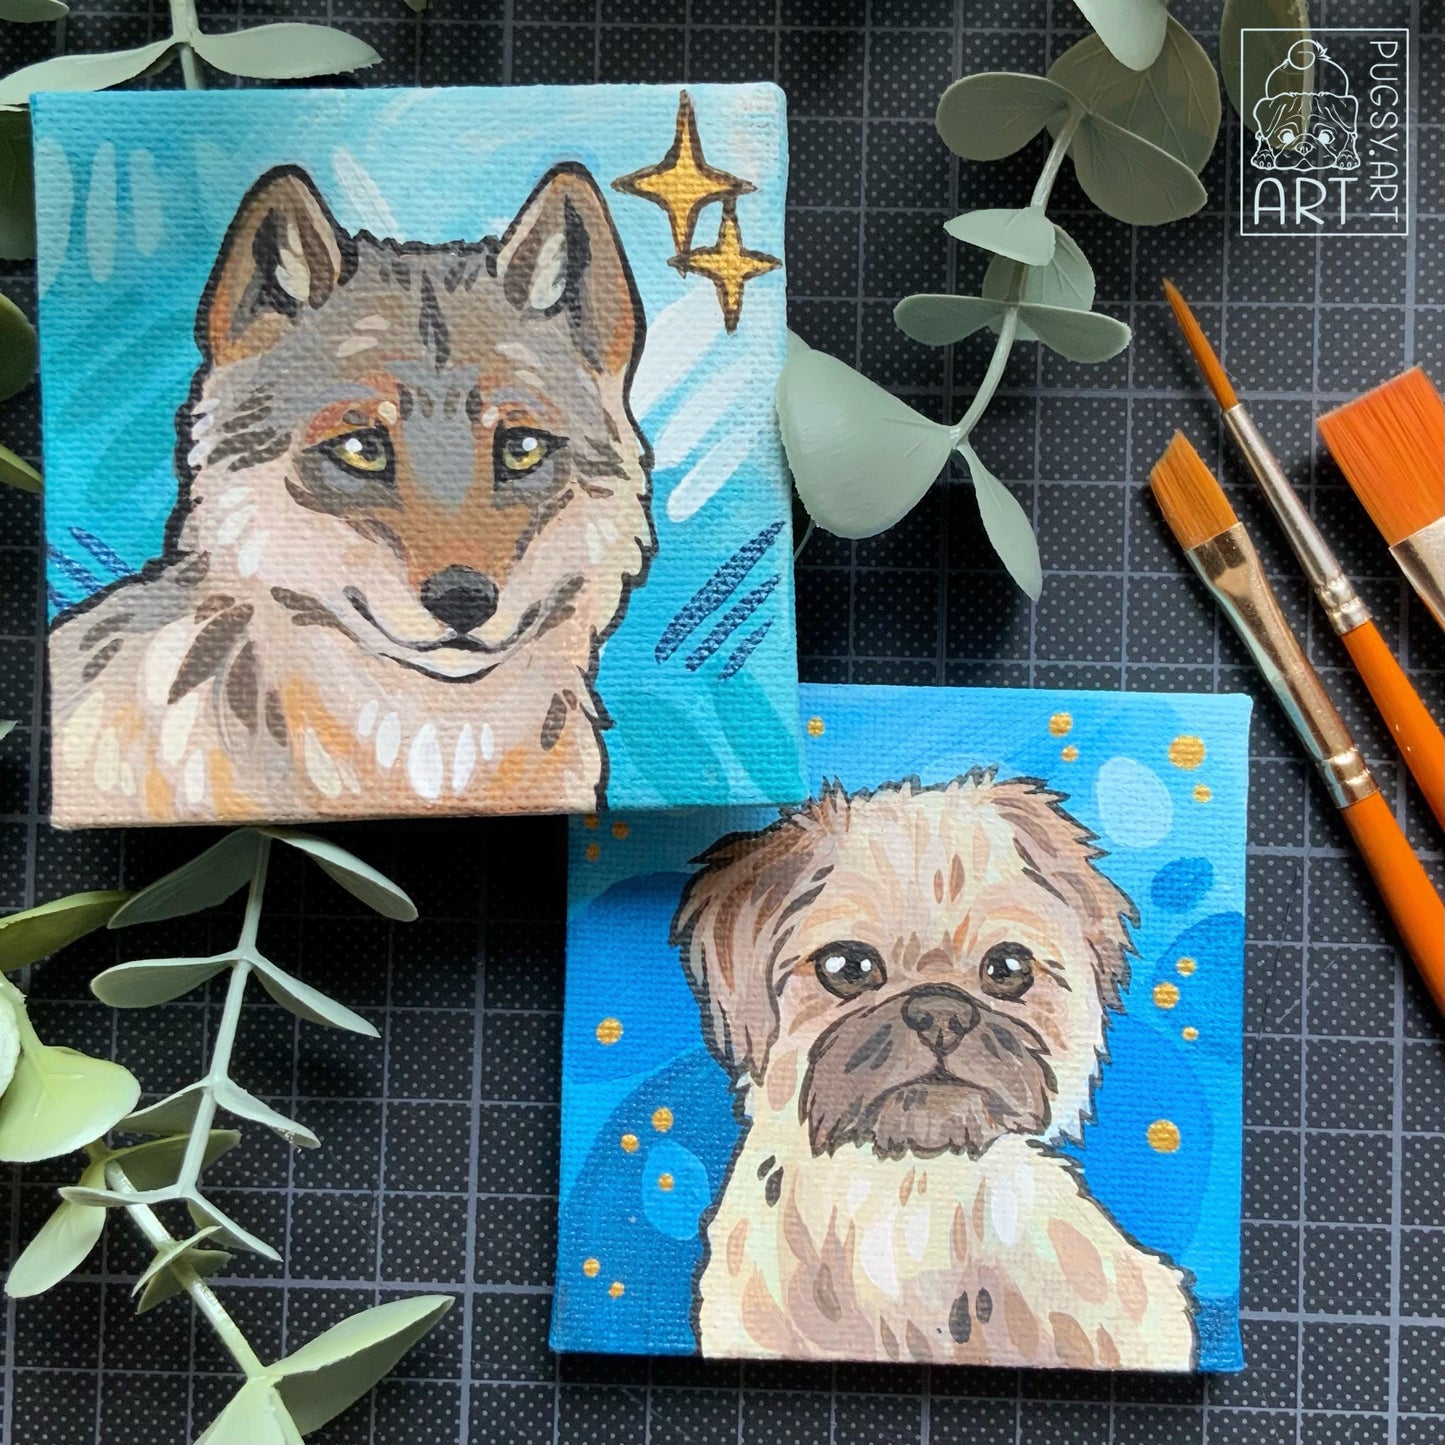 Personalized pet portrait, tiny canvas portrait, pet owner gift, small gift, small present, small acrylic painting, personalized painting